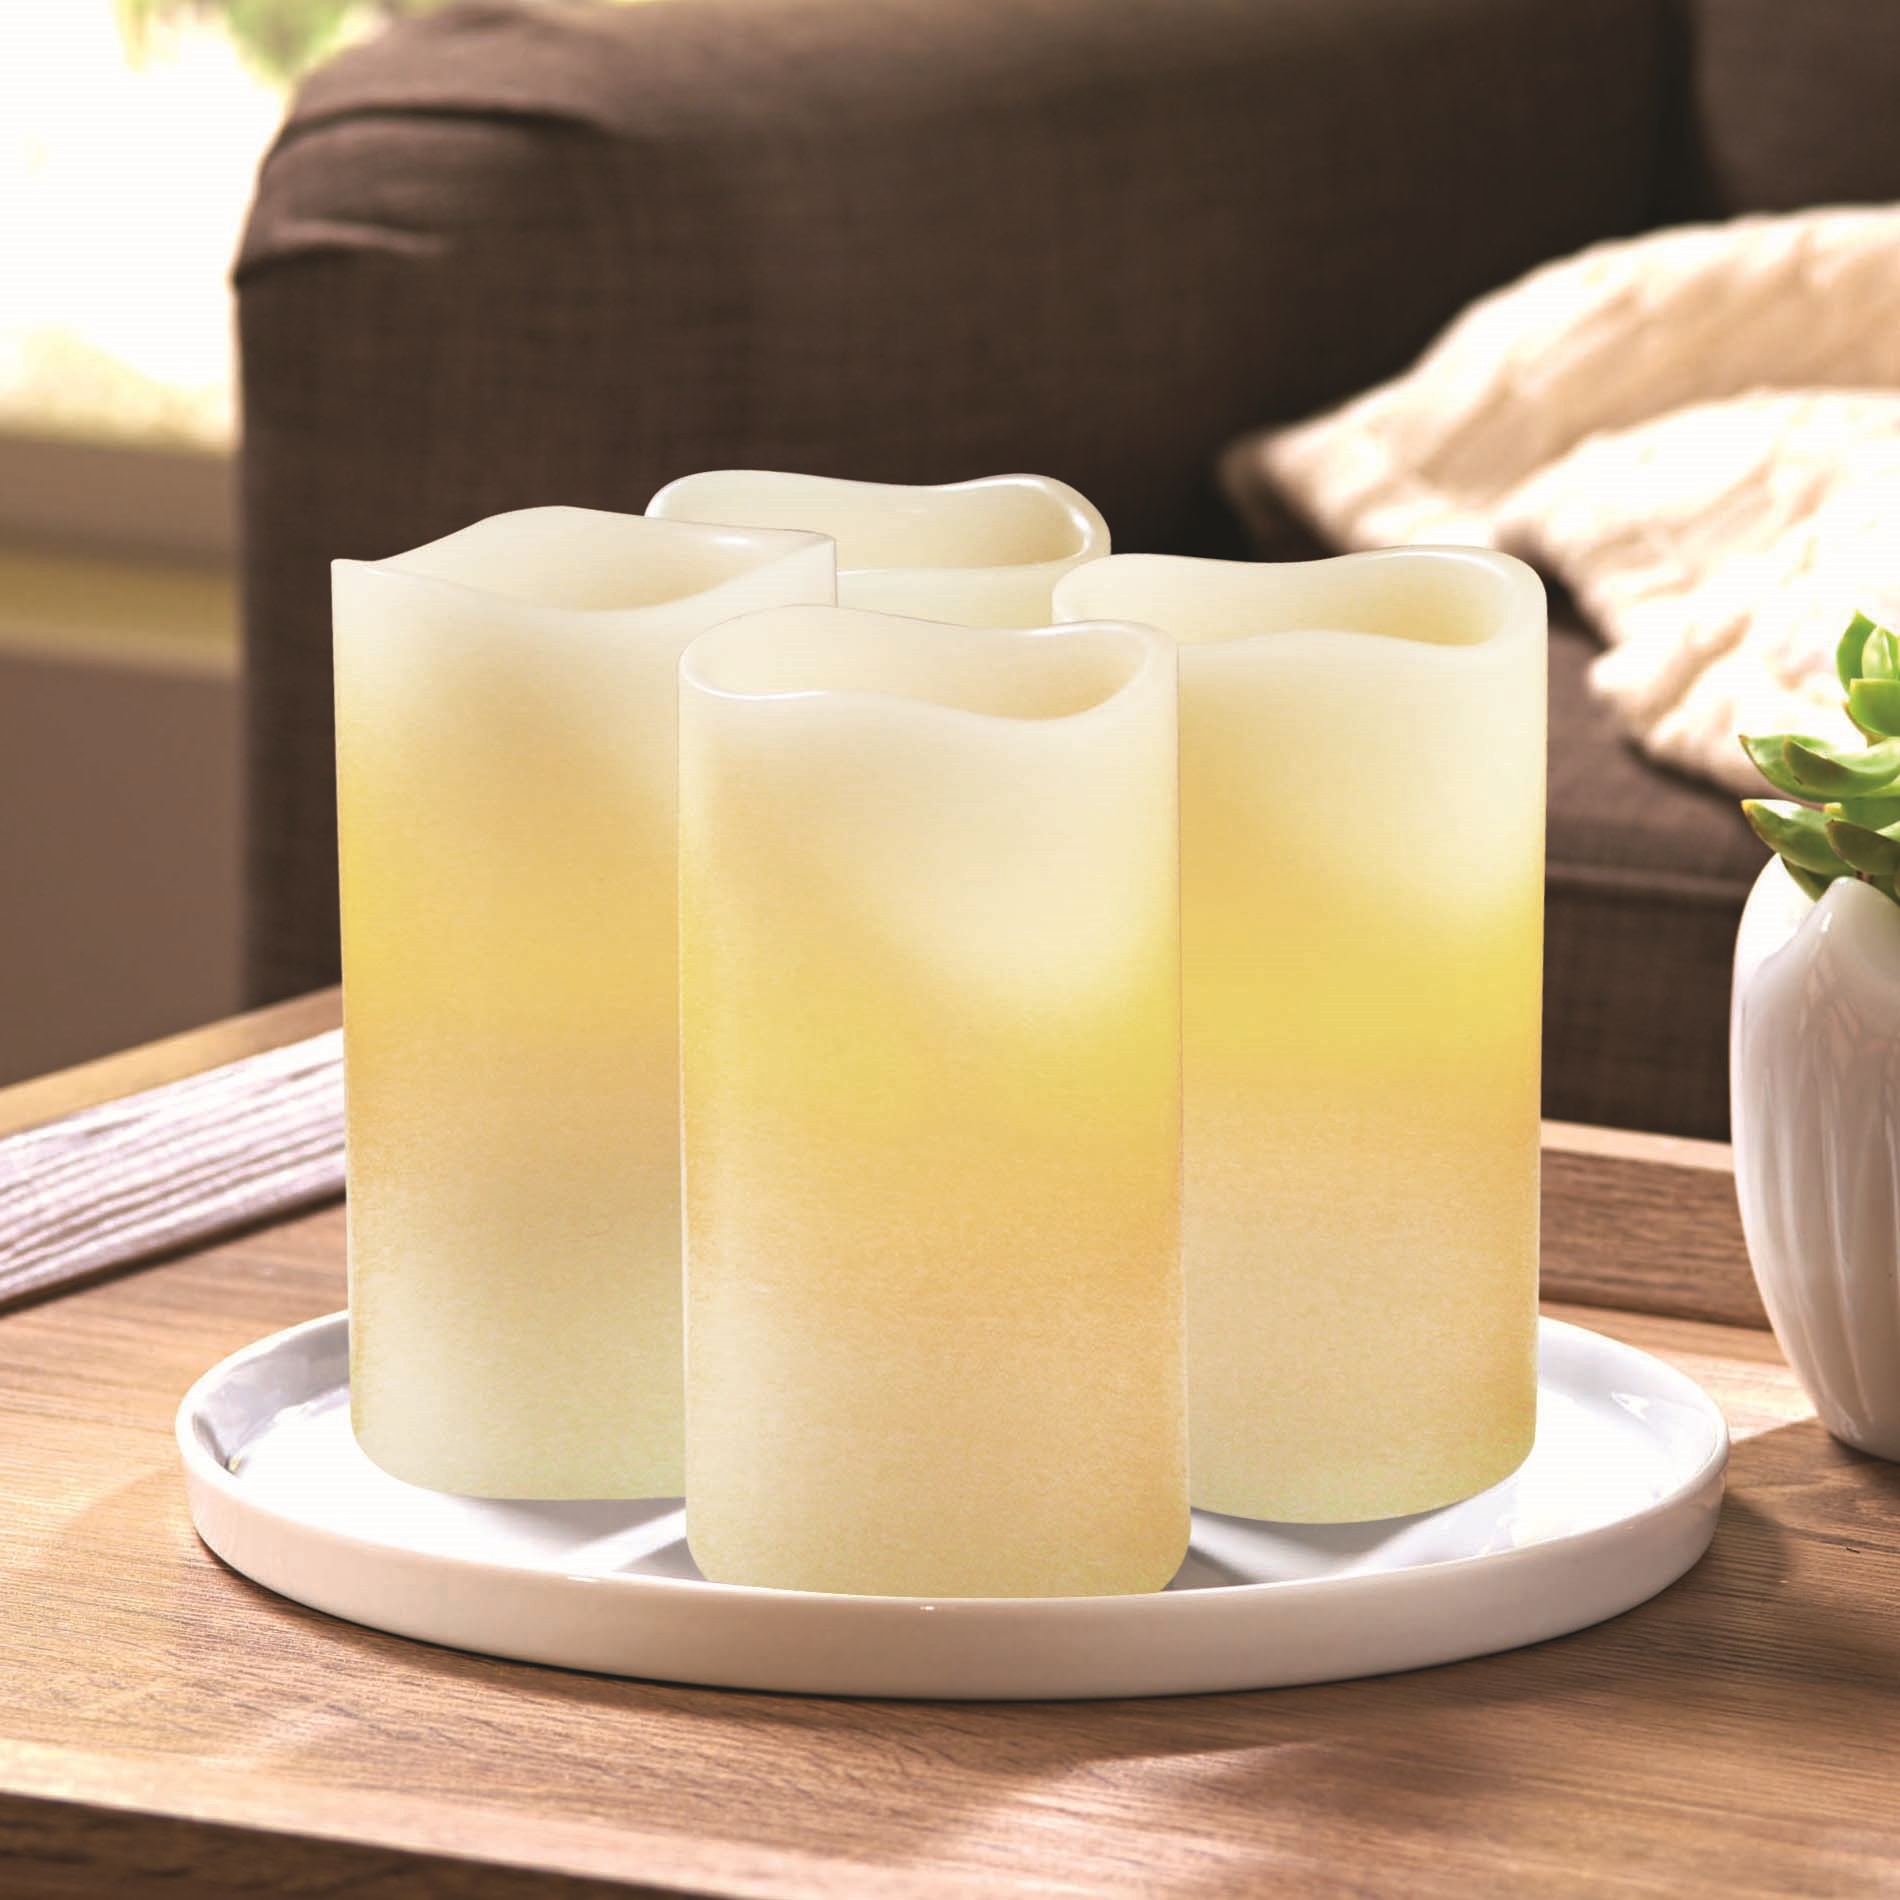 Better Homes and Gardens Flameless LED Pillar Candles 4-Pack, Vanilla Scented - image 3 of 4